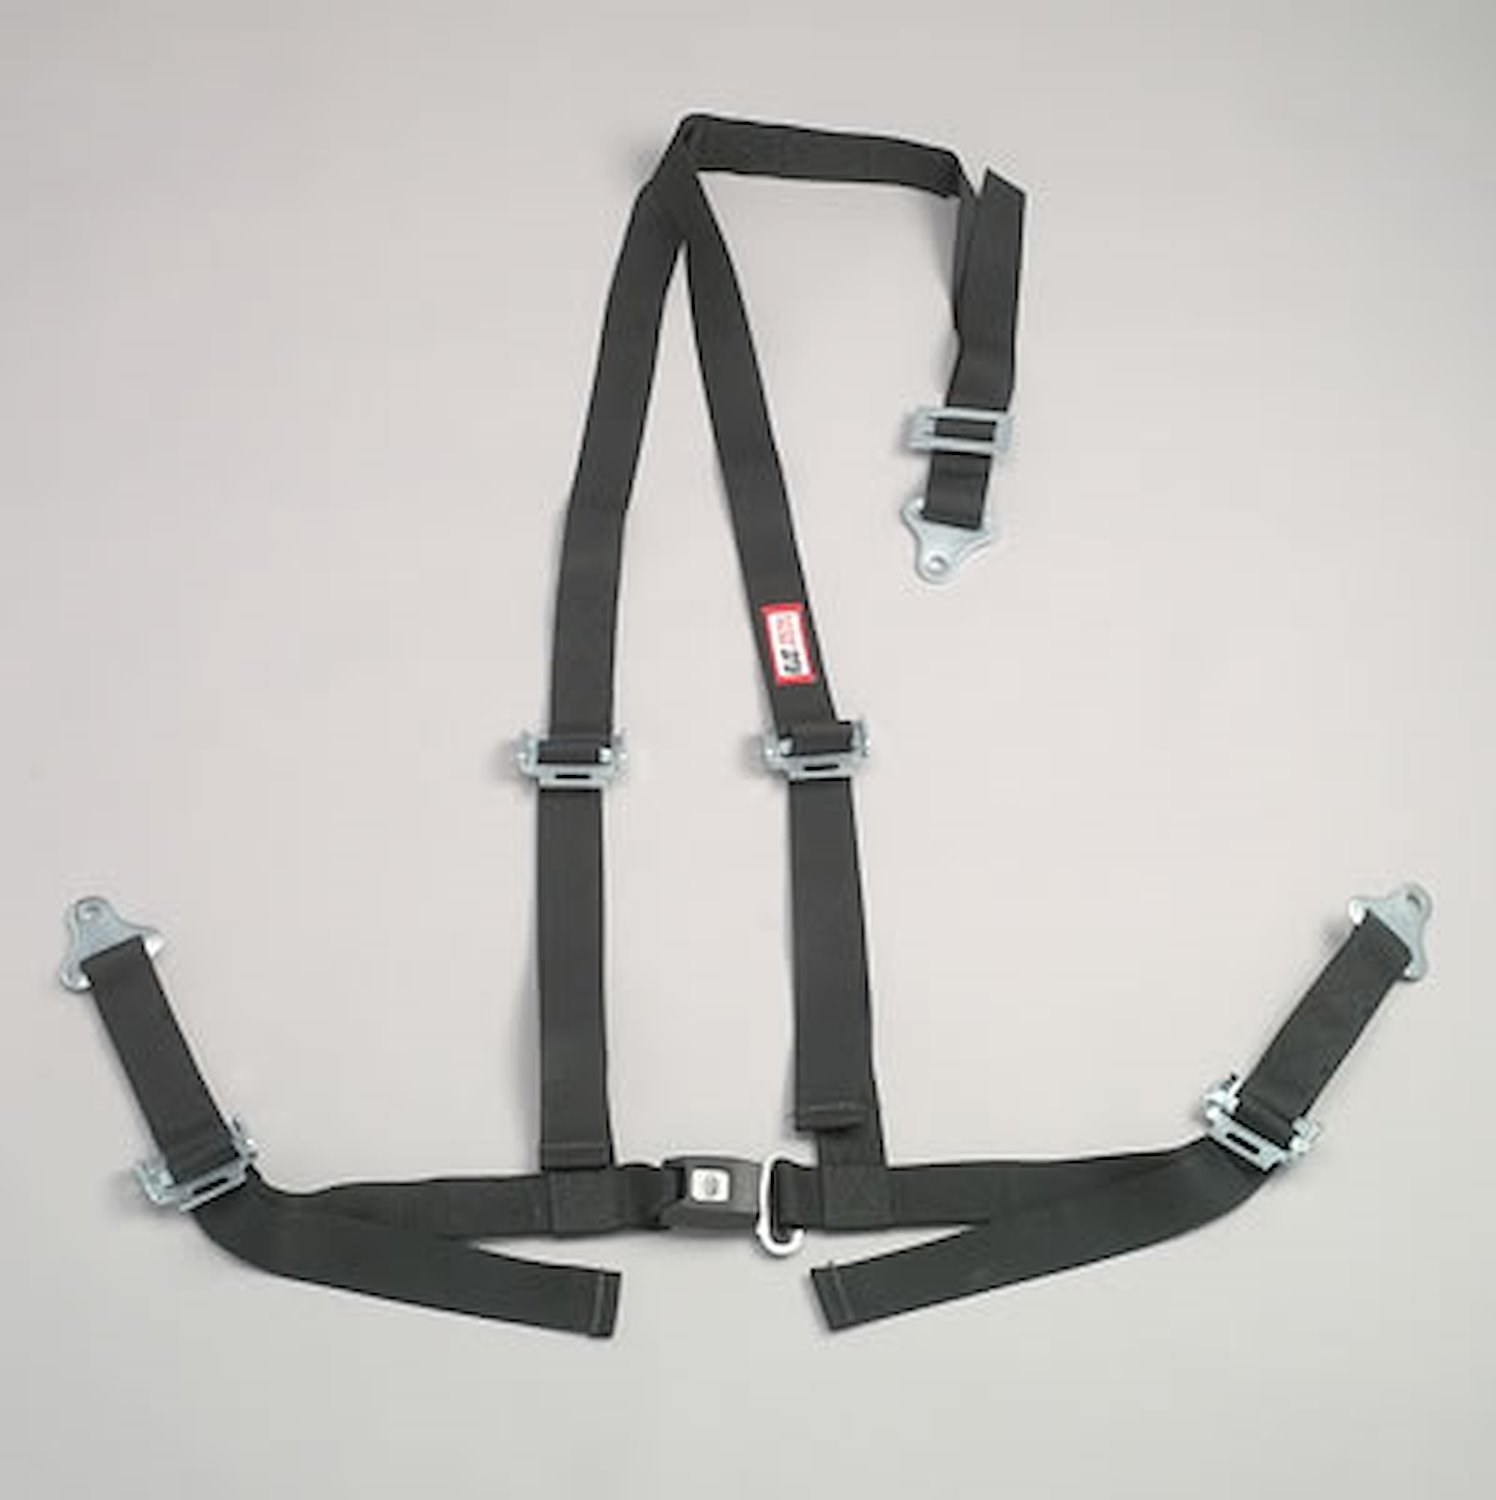 NON-SFI B&T HARNESS 2 PULL DOWN Lap Belt SNAP 2 S. H. Individual ROLL BAR Mount WRAP/SNAP GRAY